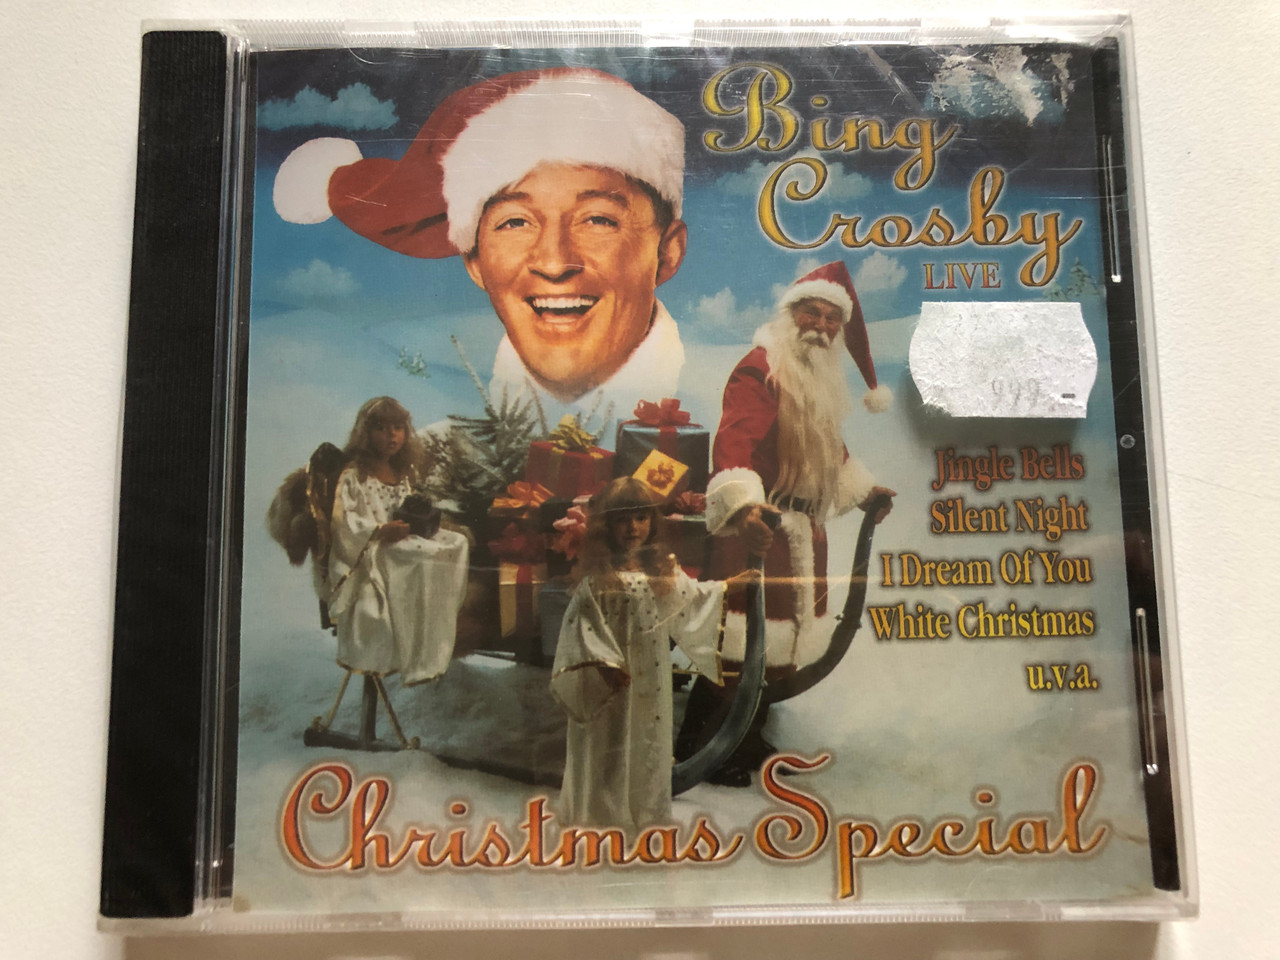 https://cdn10.bigcommerce.com/s-62bdpkt7pb/products/0/images/307856/Bing_Crosby_Live_-_Christmas_Special_Jingle_Bells_Silent_Night_I_Dream_Of_You_White_Christmas_u._v._a._ACD_Audio_CD_Stereo_CD_154_1__47078.1698904334.1280.1280.JPG?c=2